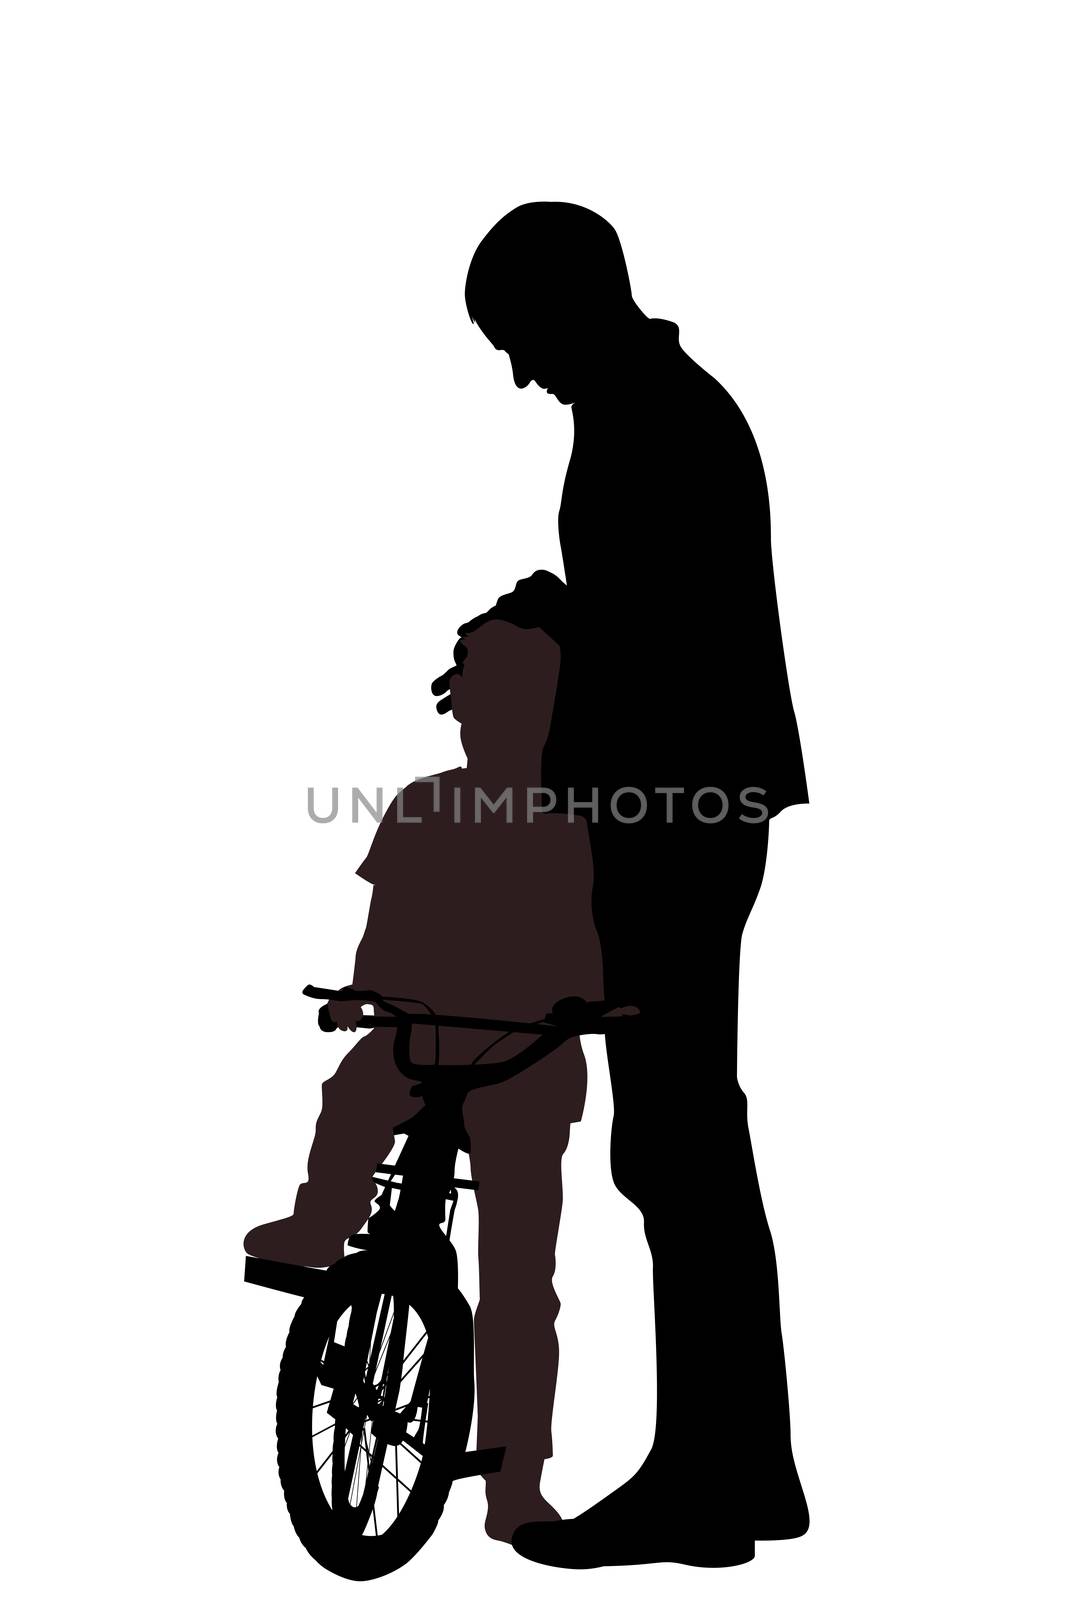 Silhouettes of father and son by hibrida13